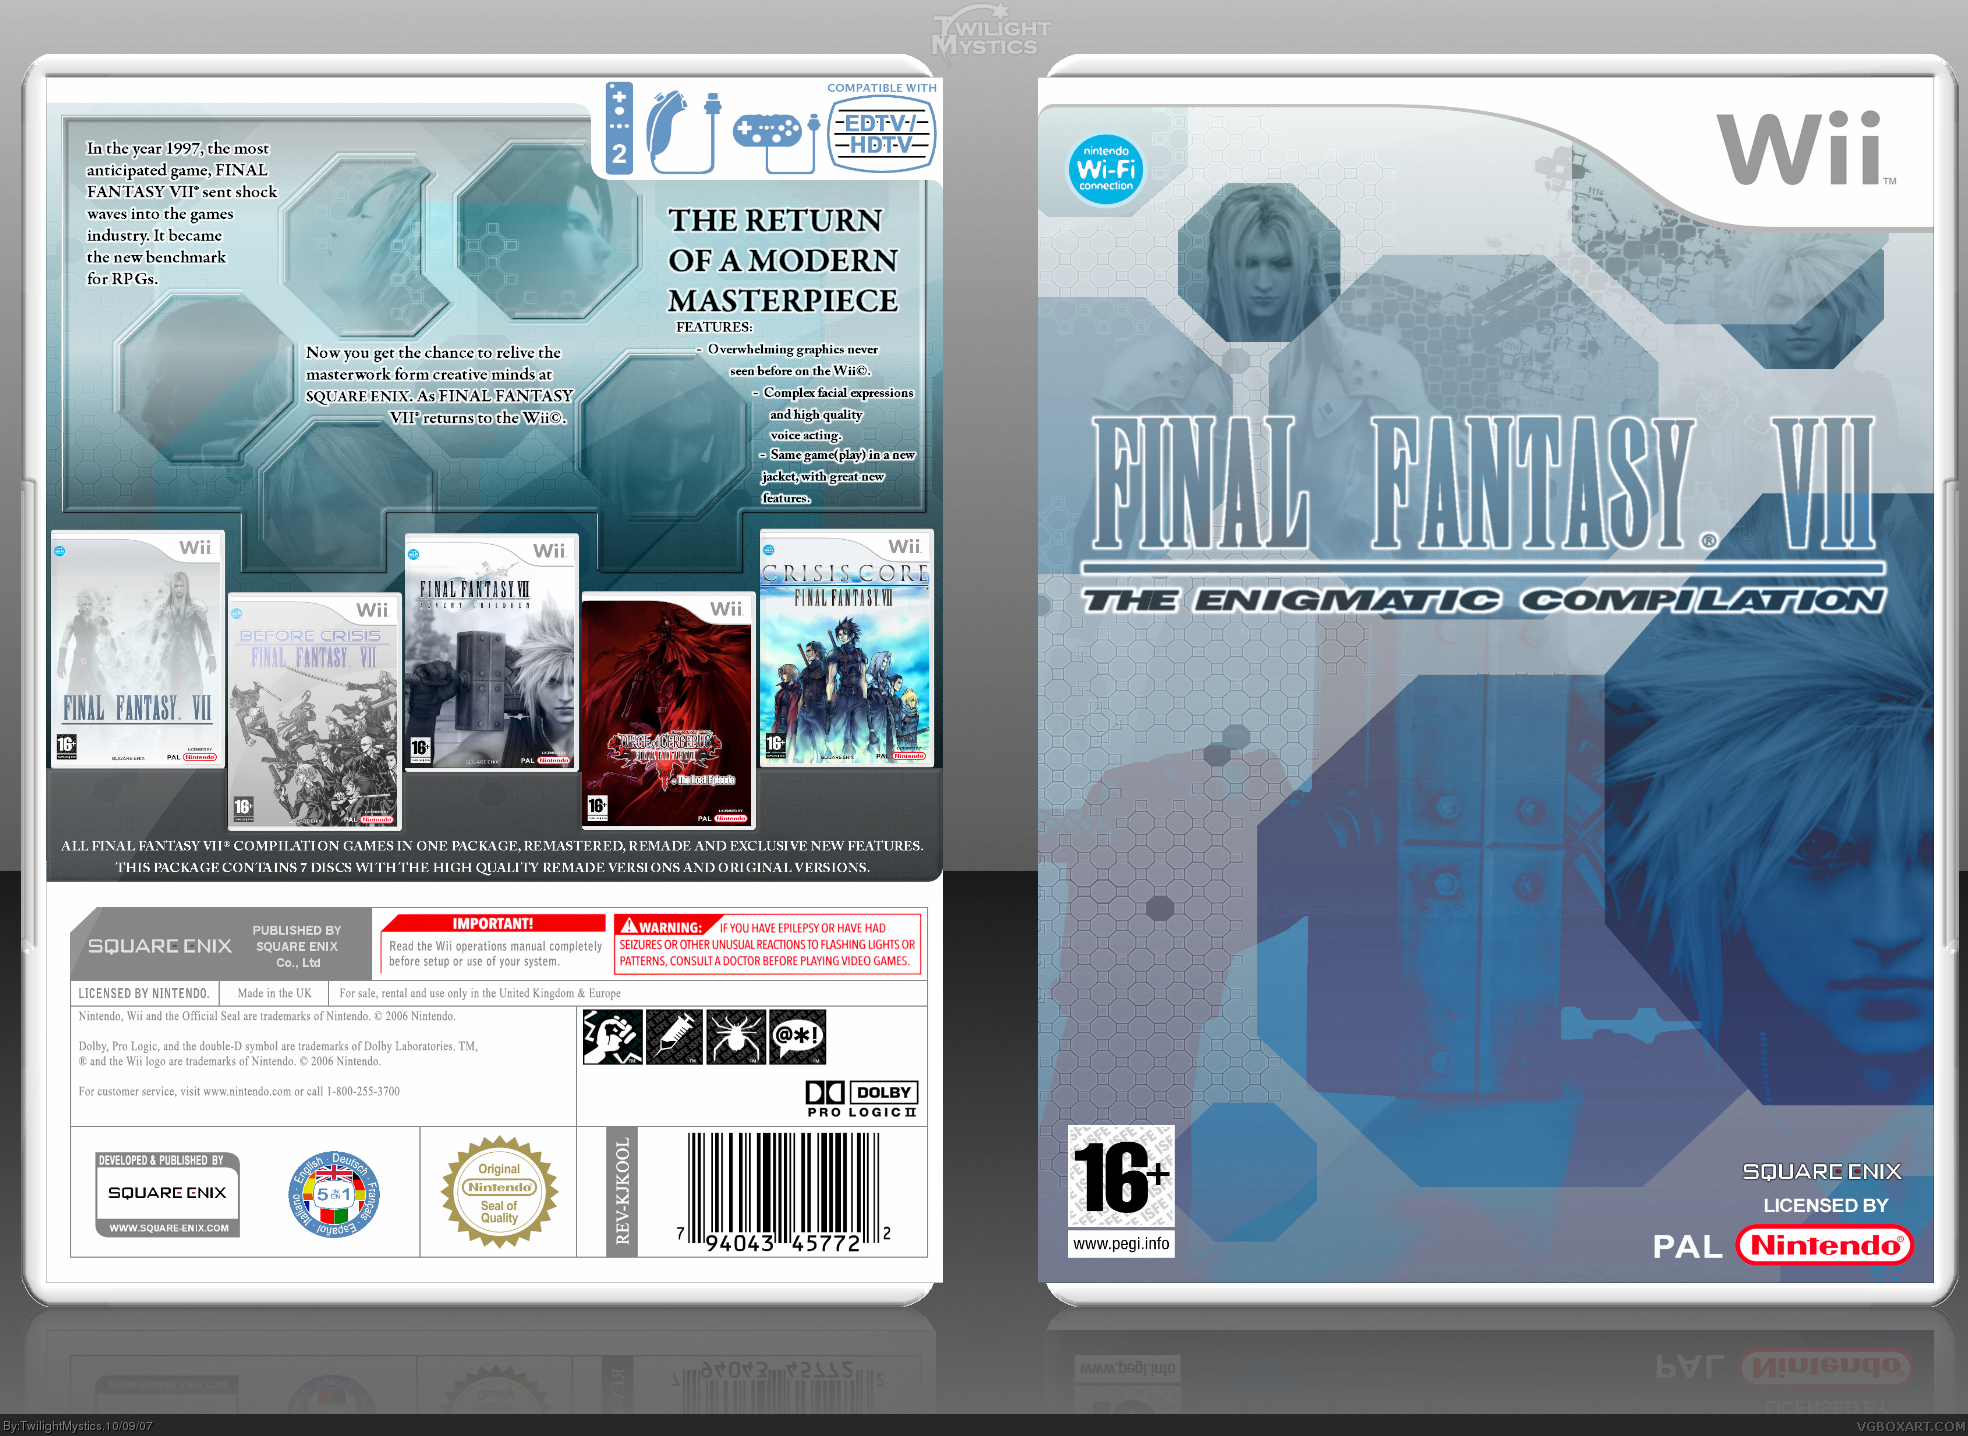 Final Fantasy VII: The Engimatic Compilation box cover